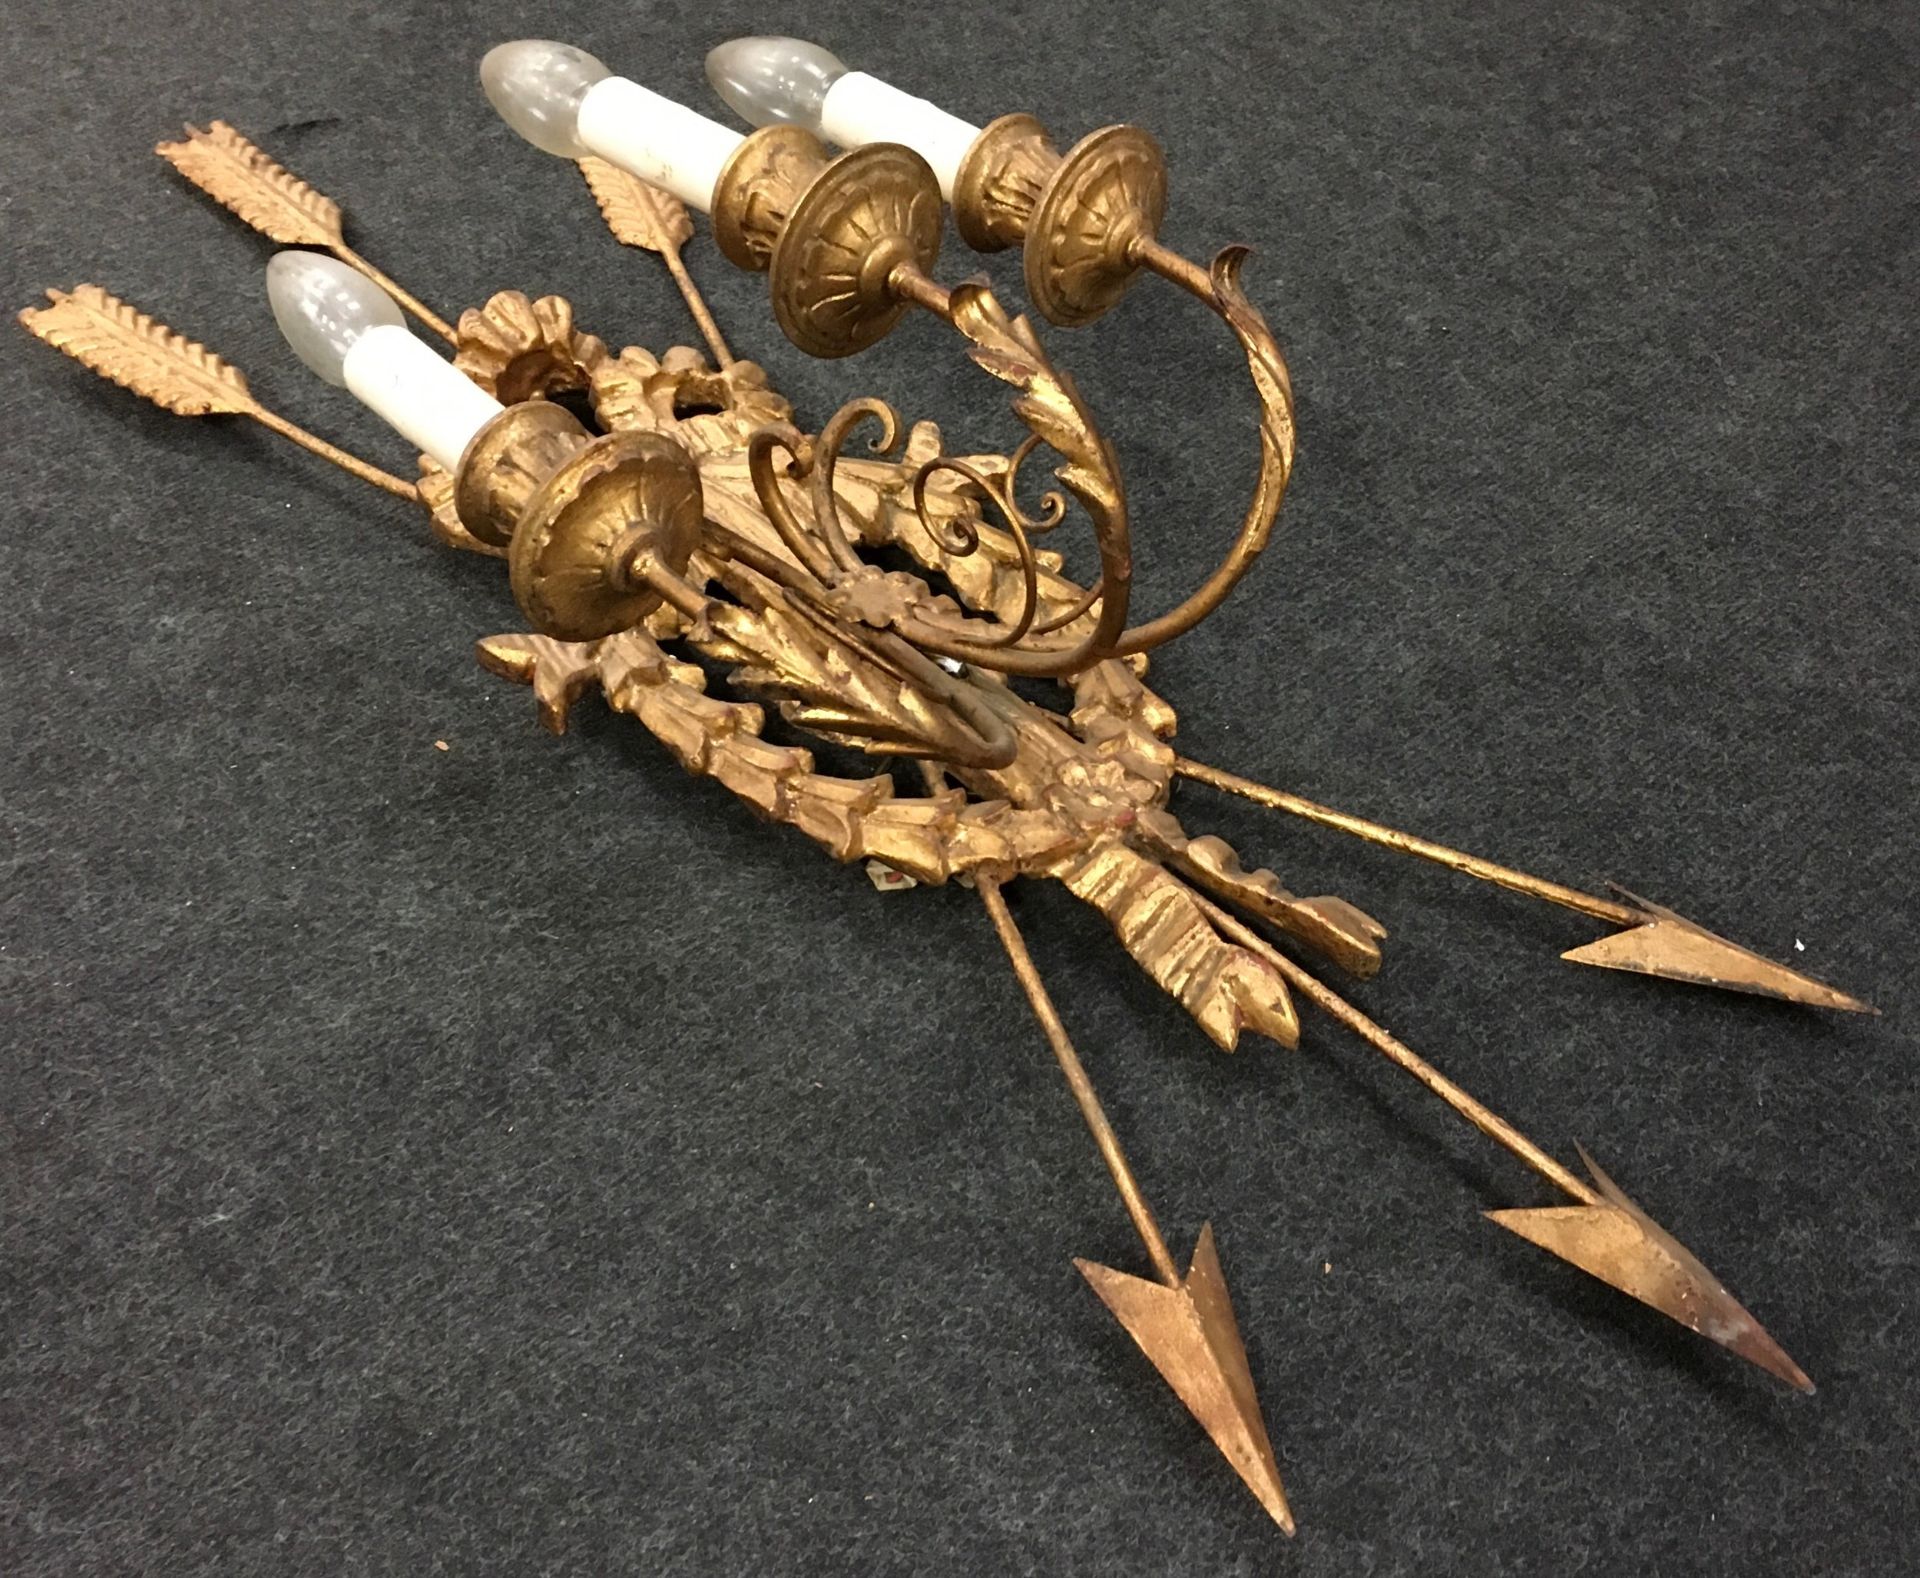 Unusual large 3 lamp wall light of gilded metal construction featuring fletched arrows and laurel - Image 3 of 4